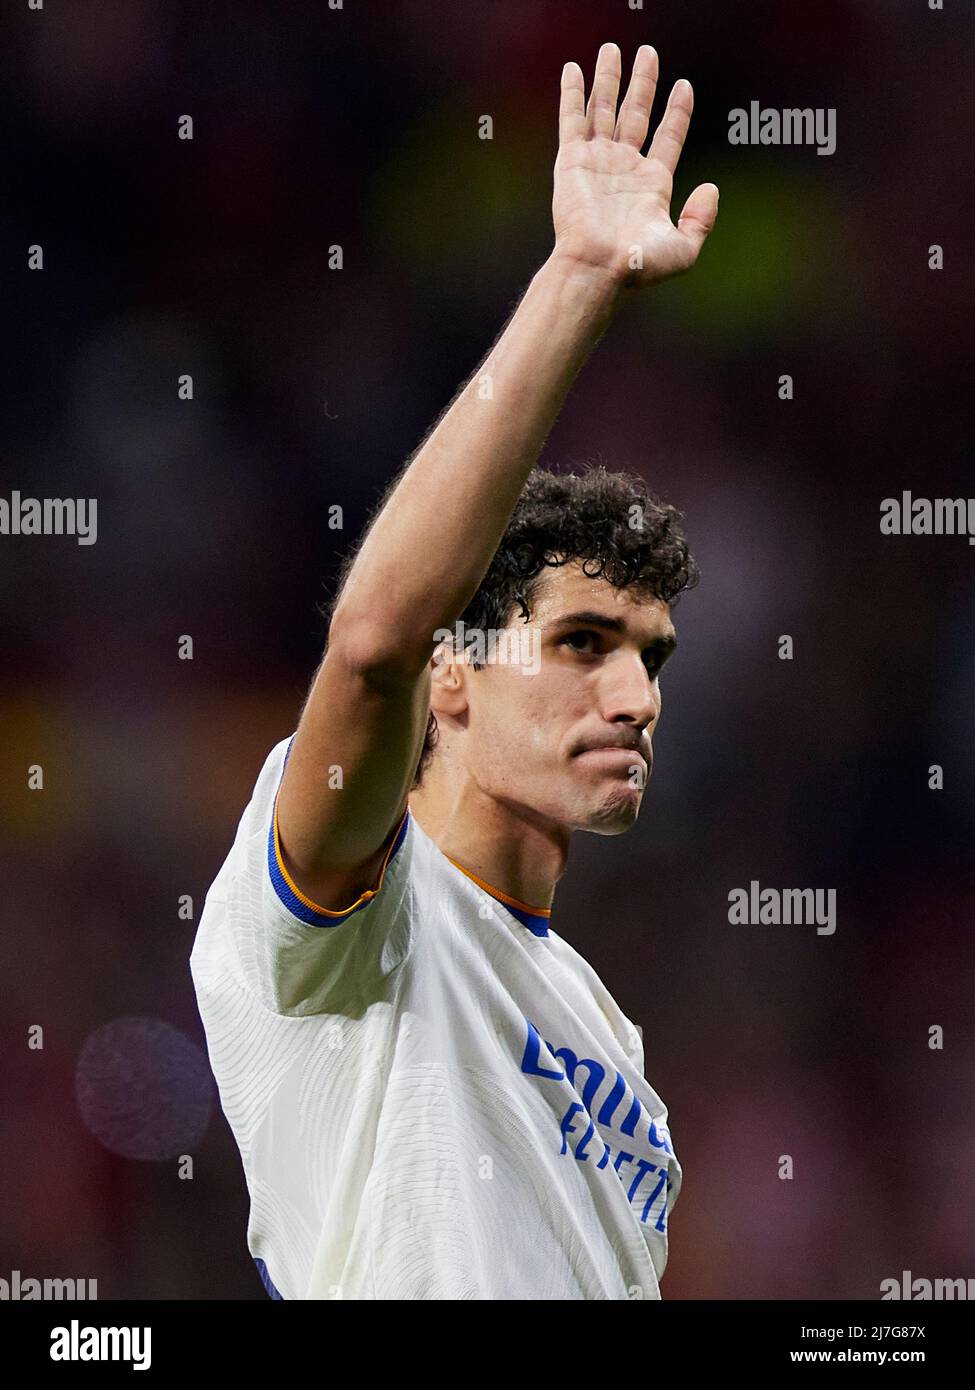 Madrid, Spain, May 08, 2022, Jesus Vallejo of Real Madrid during the La Liga match between Atletico de Madrid and Real Madrid CF played at Wanda Metropolitano Stadium on May 08, 2022 in Madrid, Spain. (Photo by Ruben Albarran / PRESSINPHOTO) Stock Photo